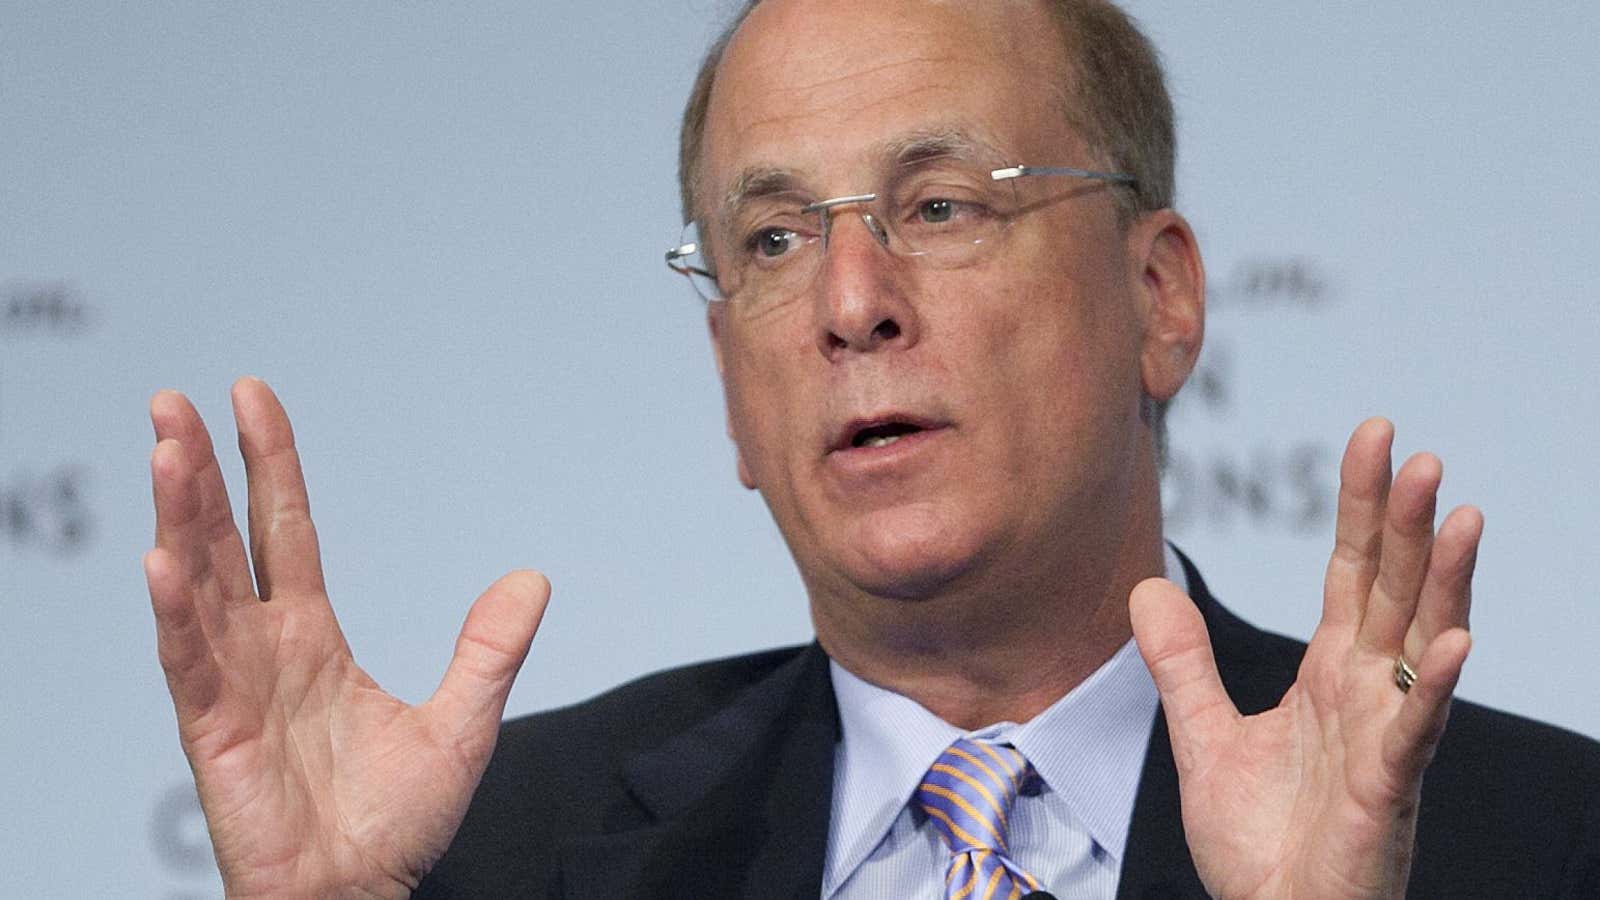 In a letter to CEOs, Larry Fink wrote that companies should benefit society.